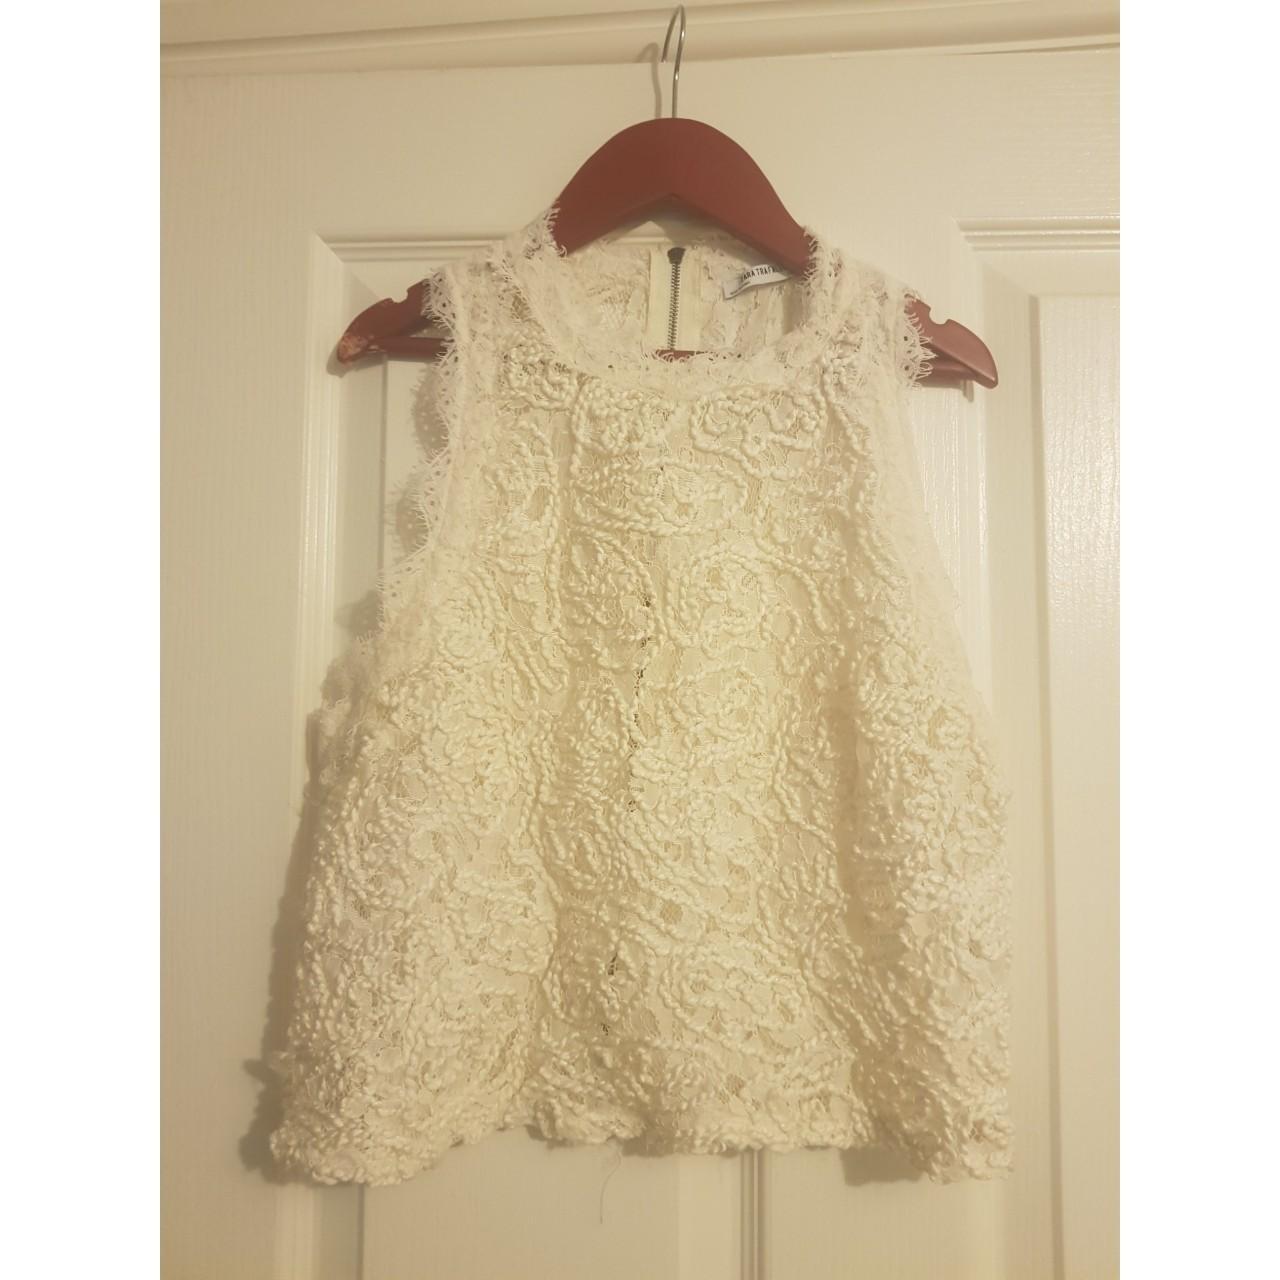 Zara cream lace top size S Only worn once! Free... - Depop